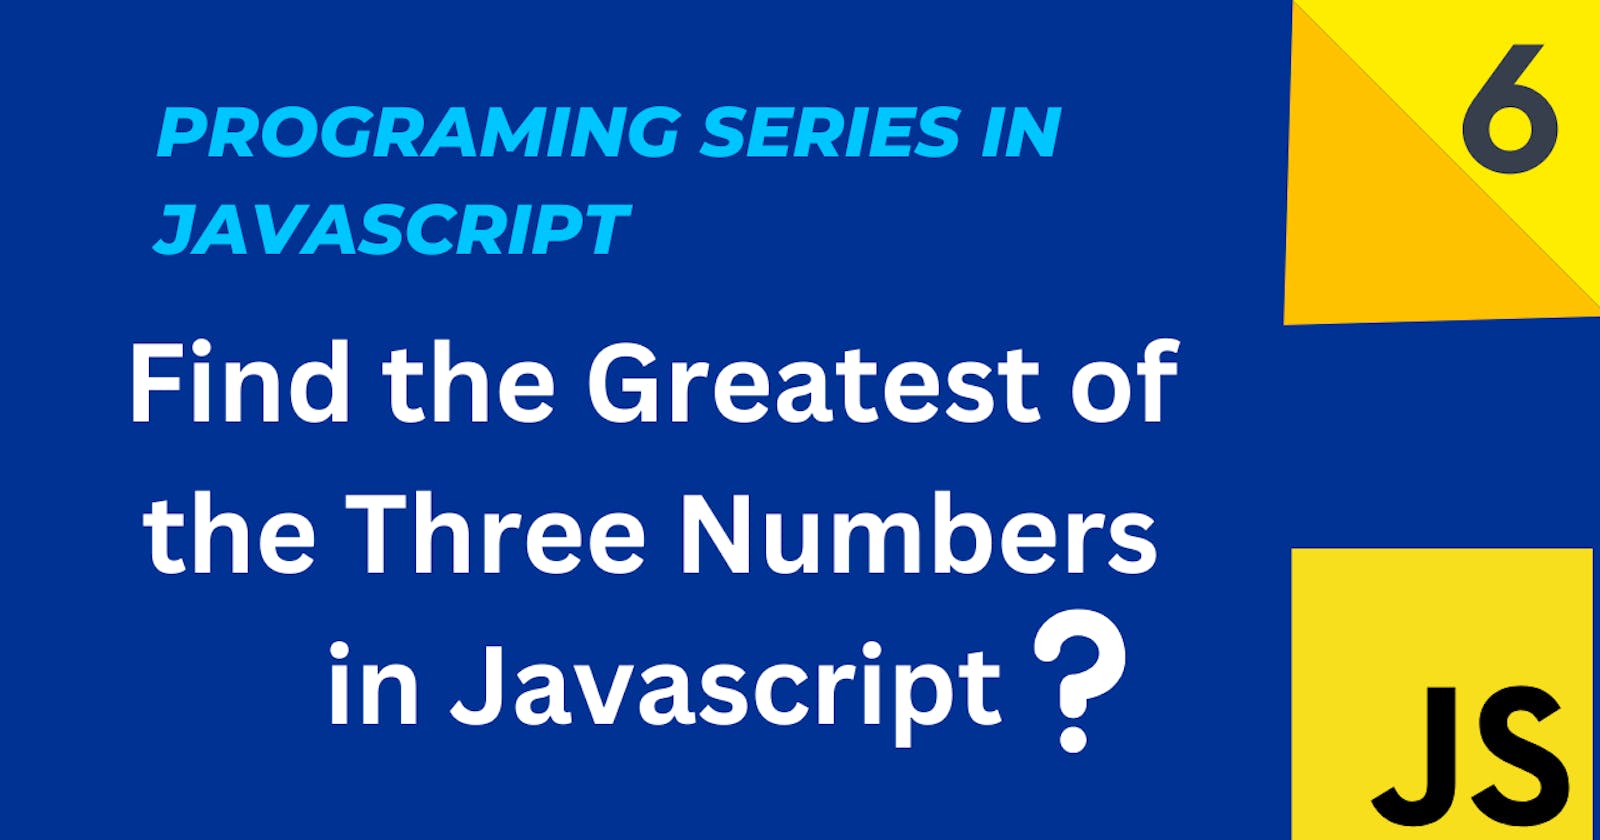 Find the Greatest of the Three Numbers in Javascript